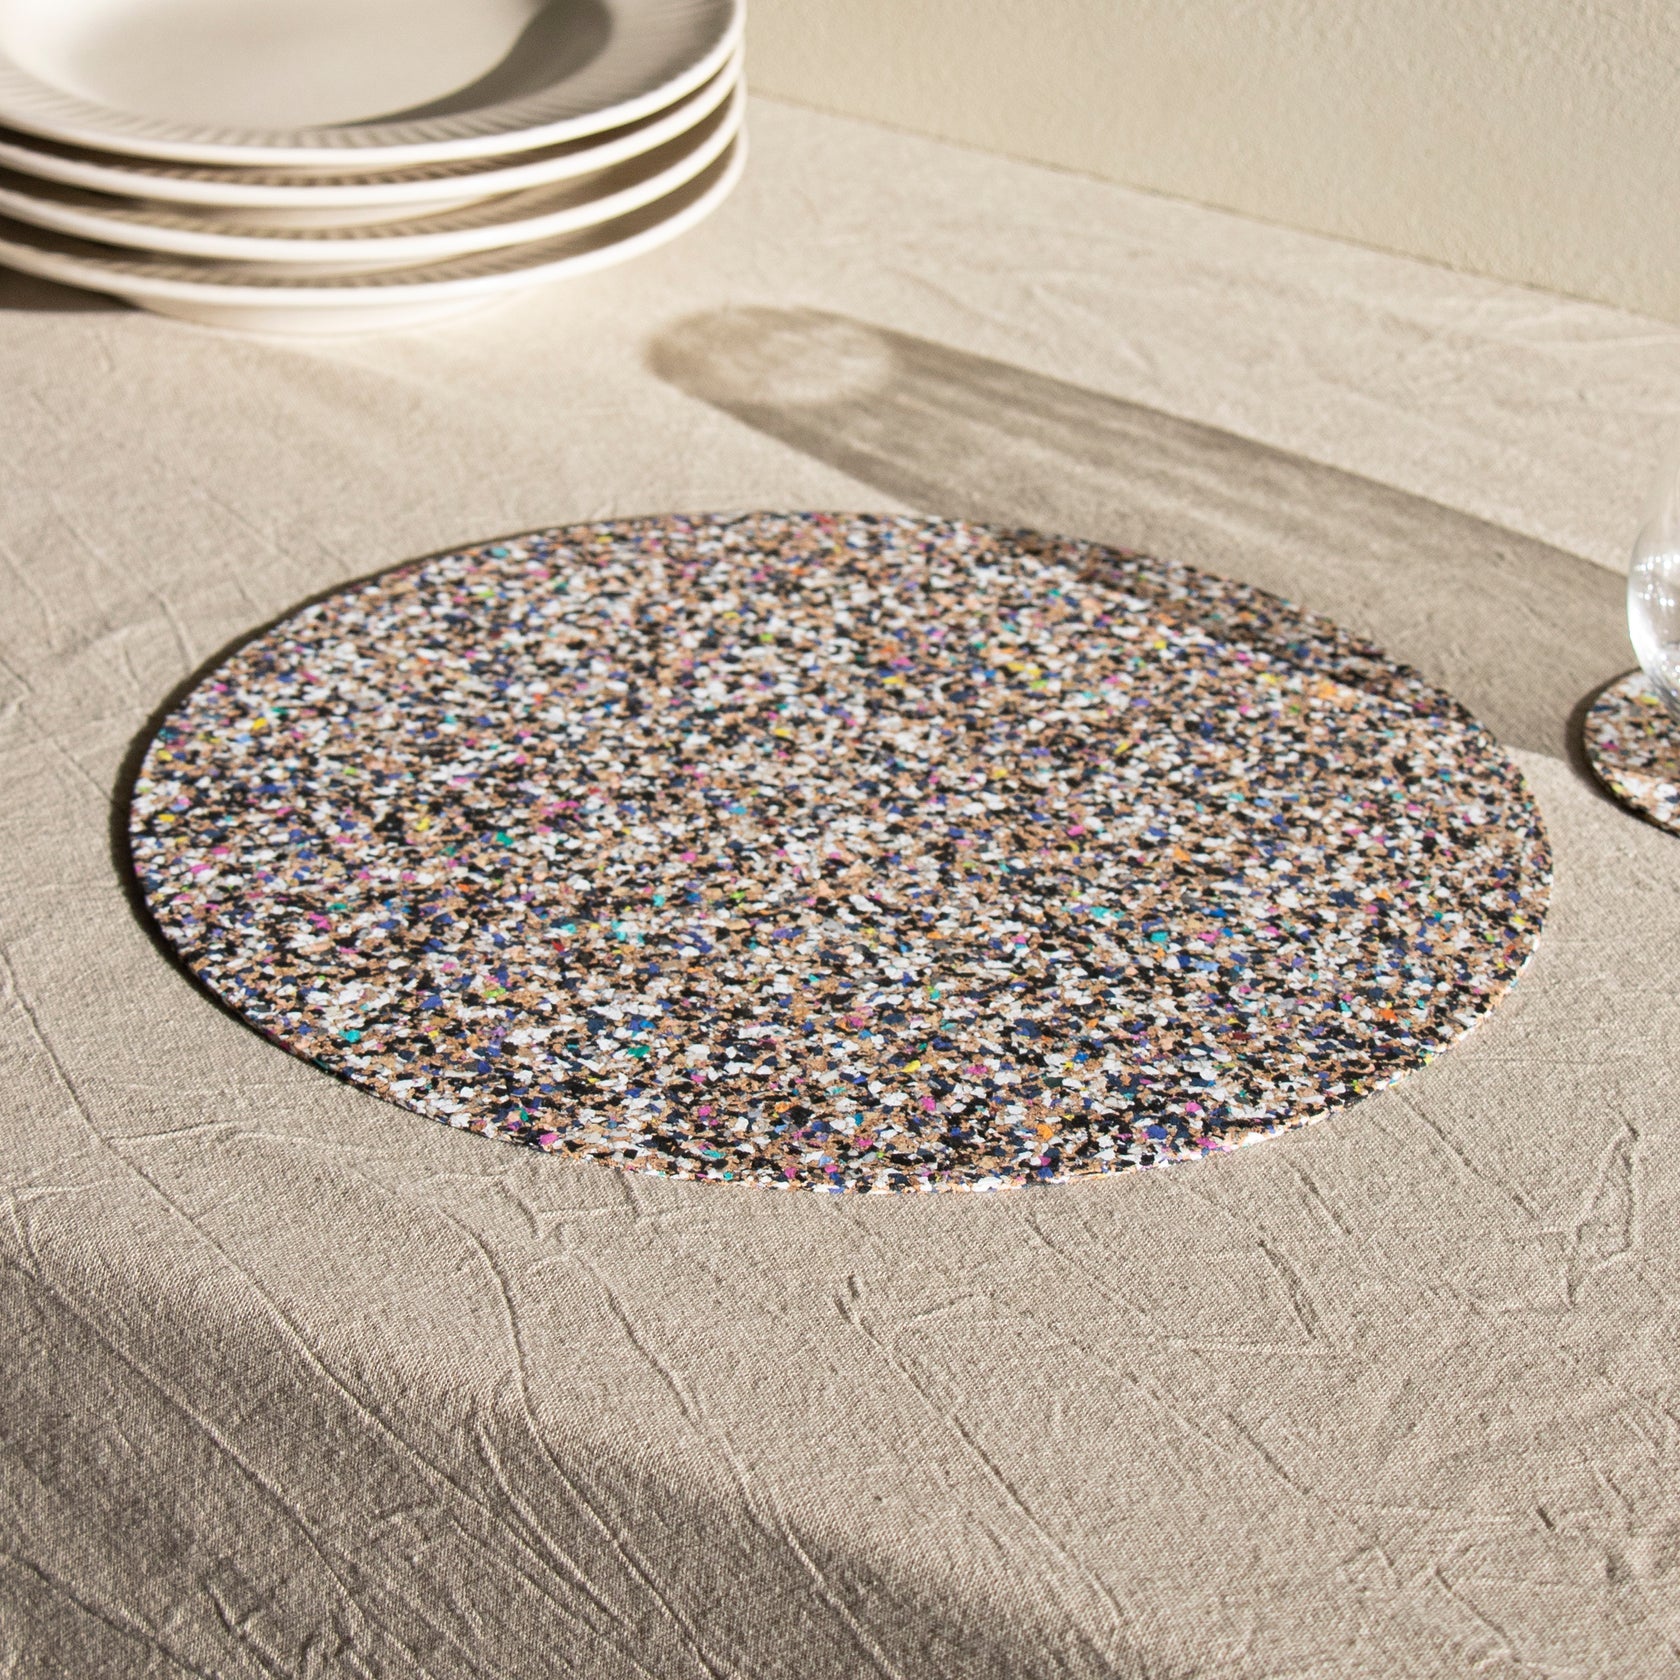 Beach Clean Round Placemat - Set of 4